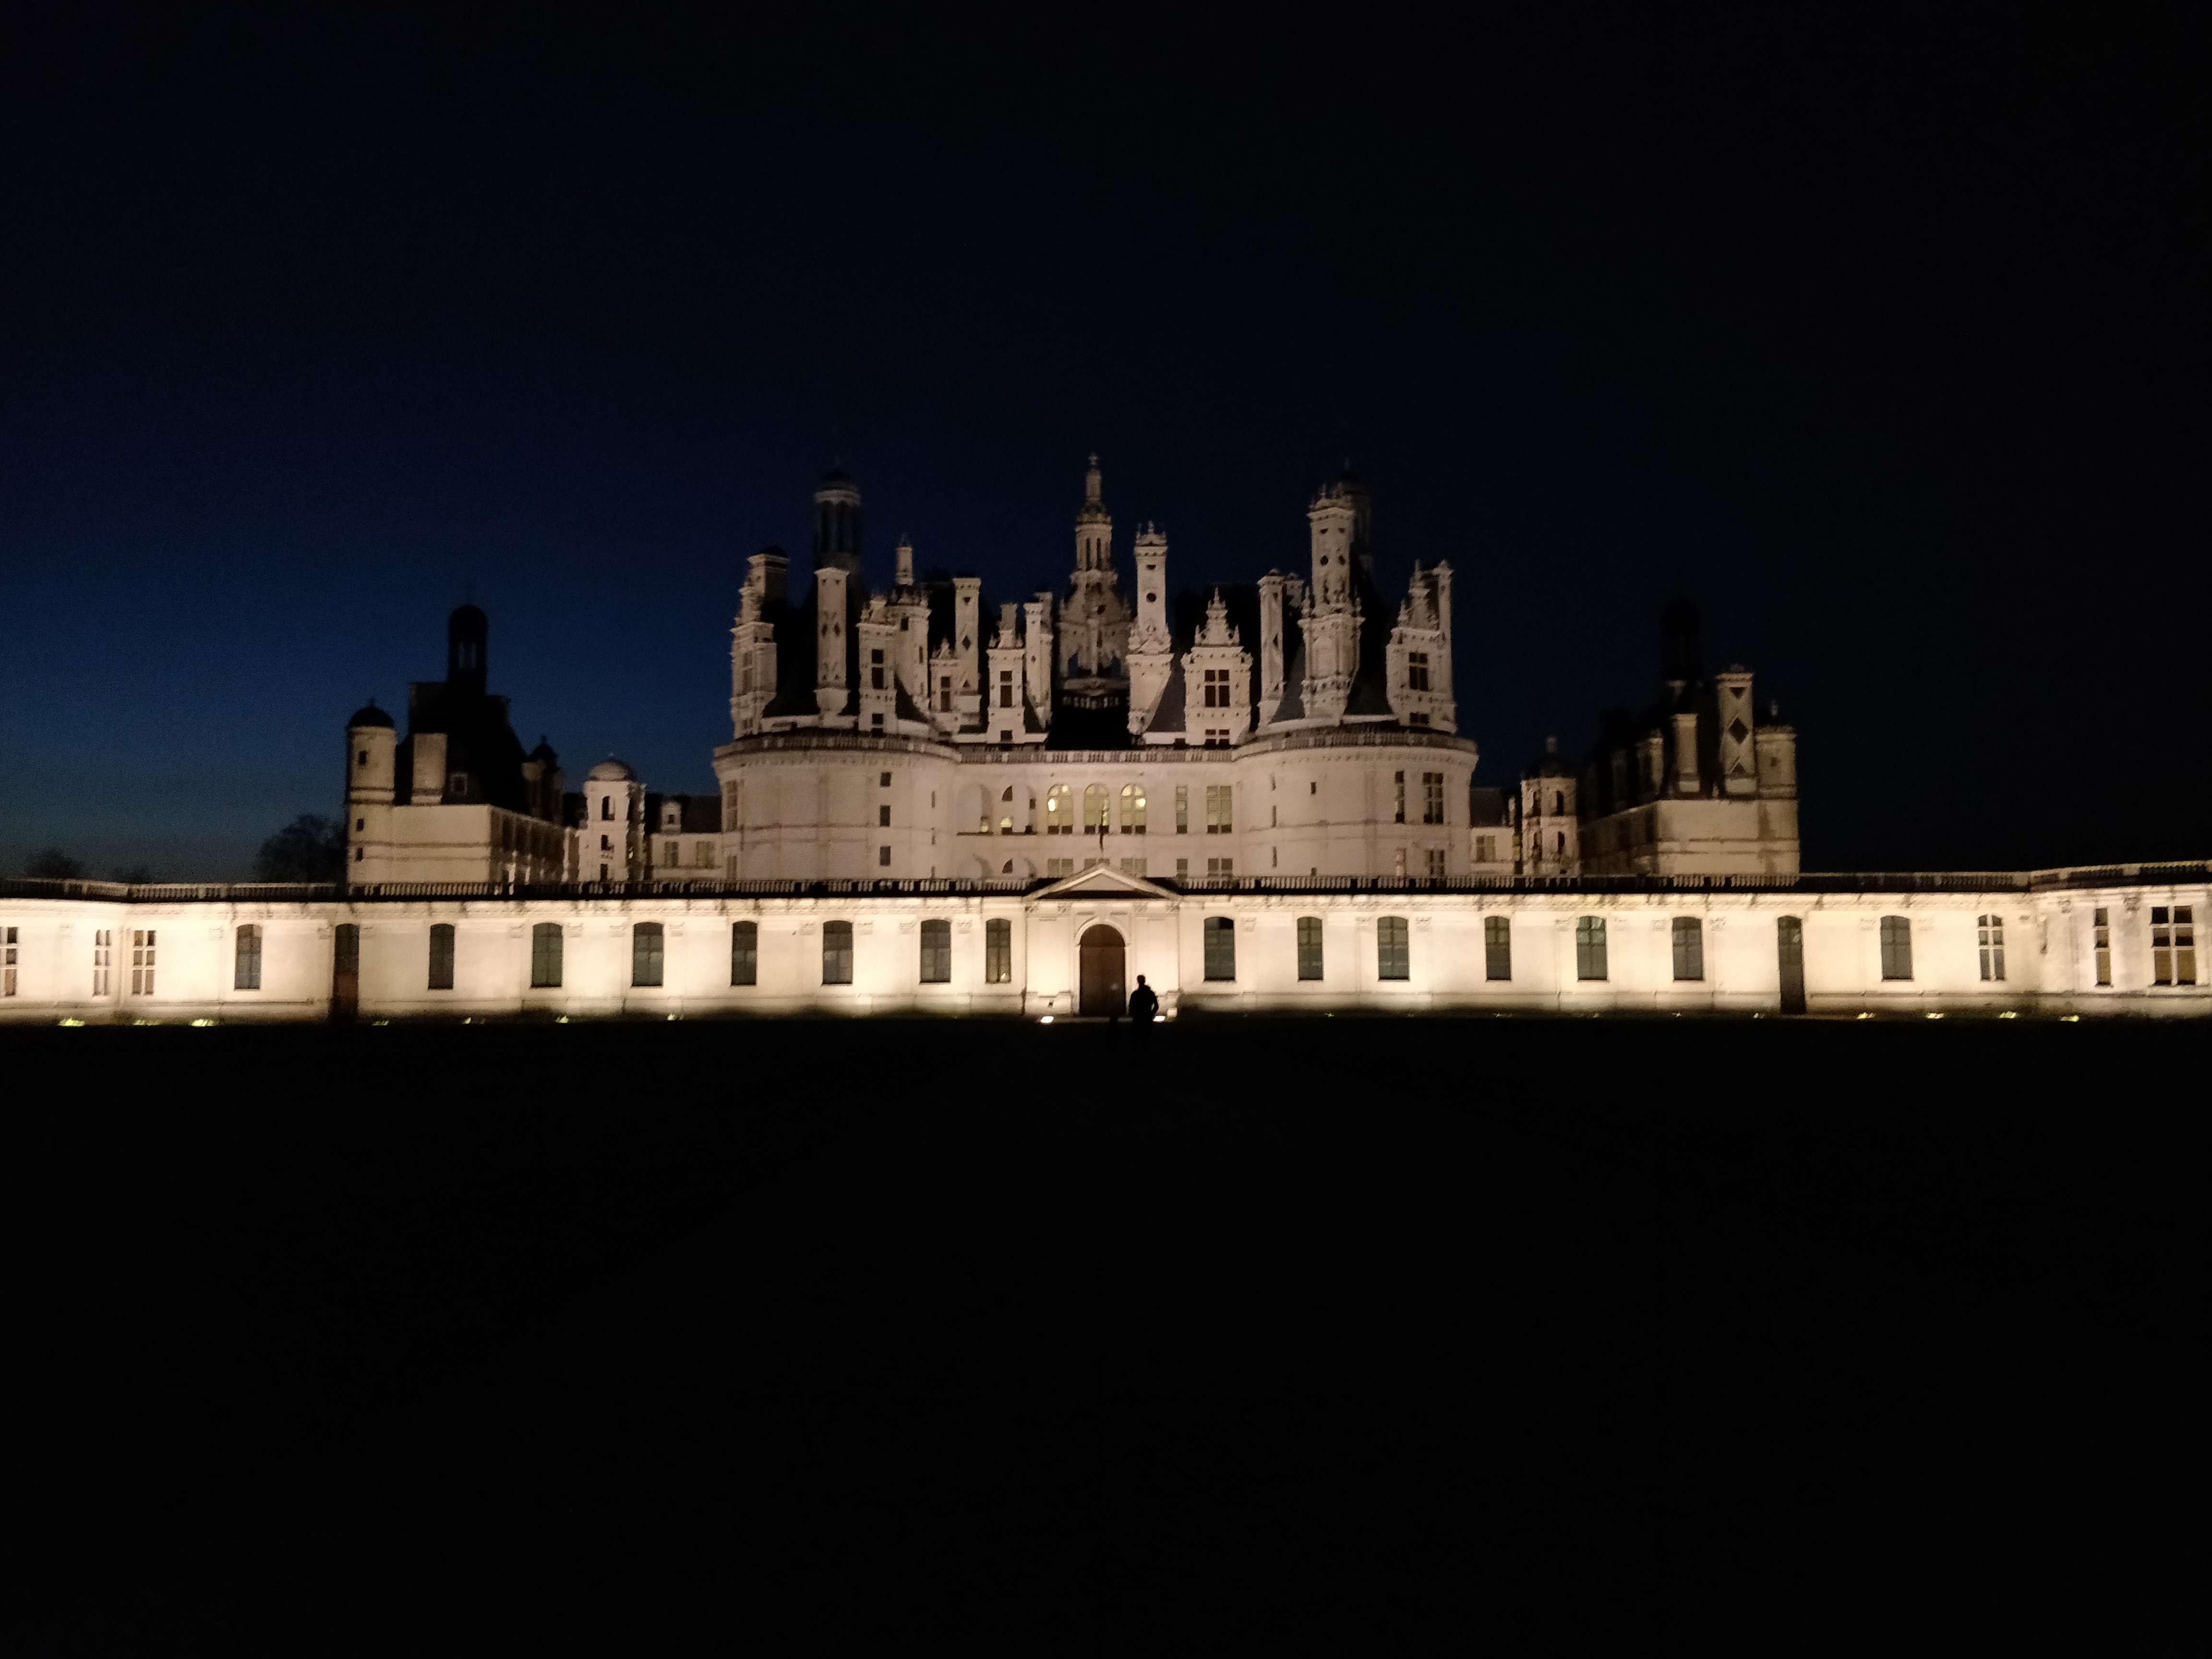 Night view front @ Chateau de Chambord, France